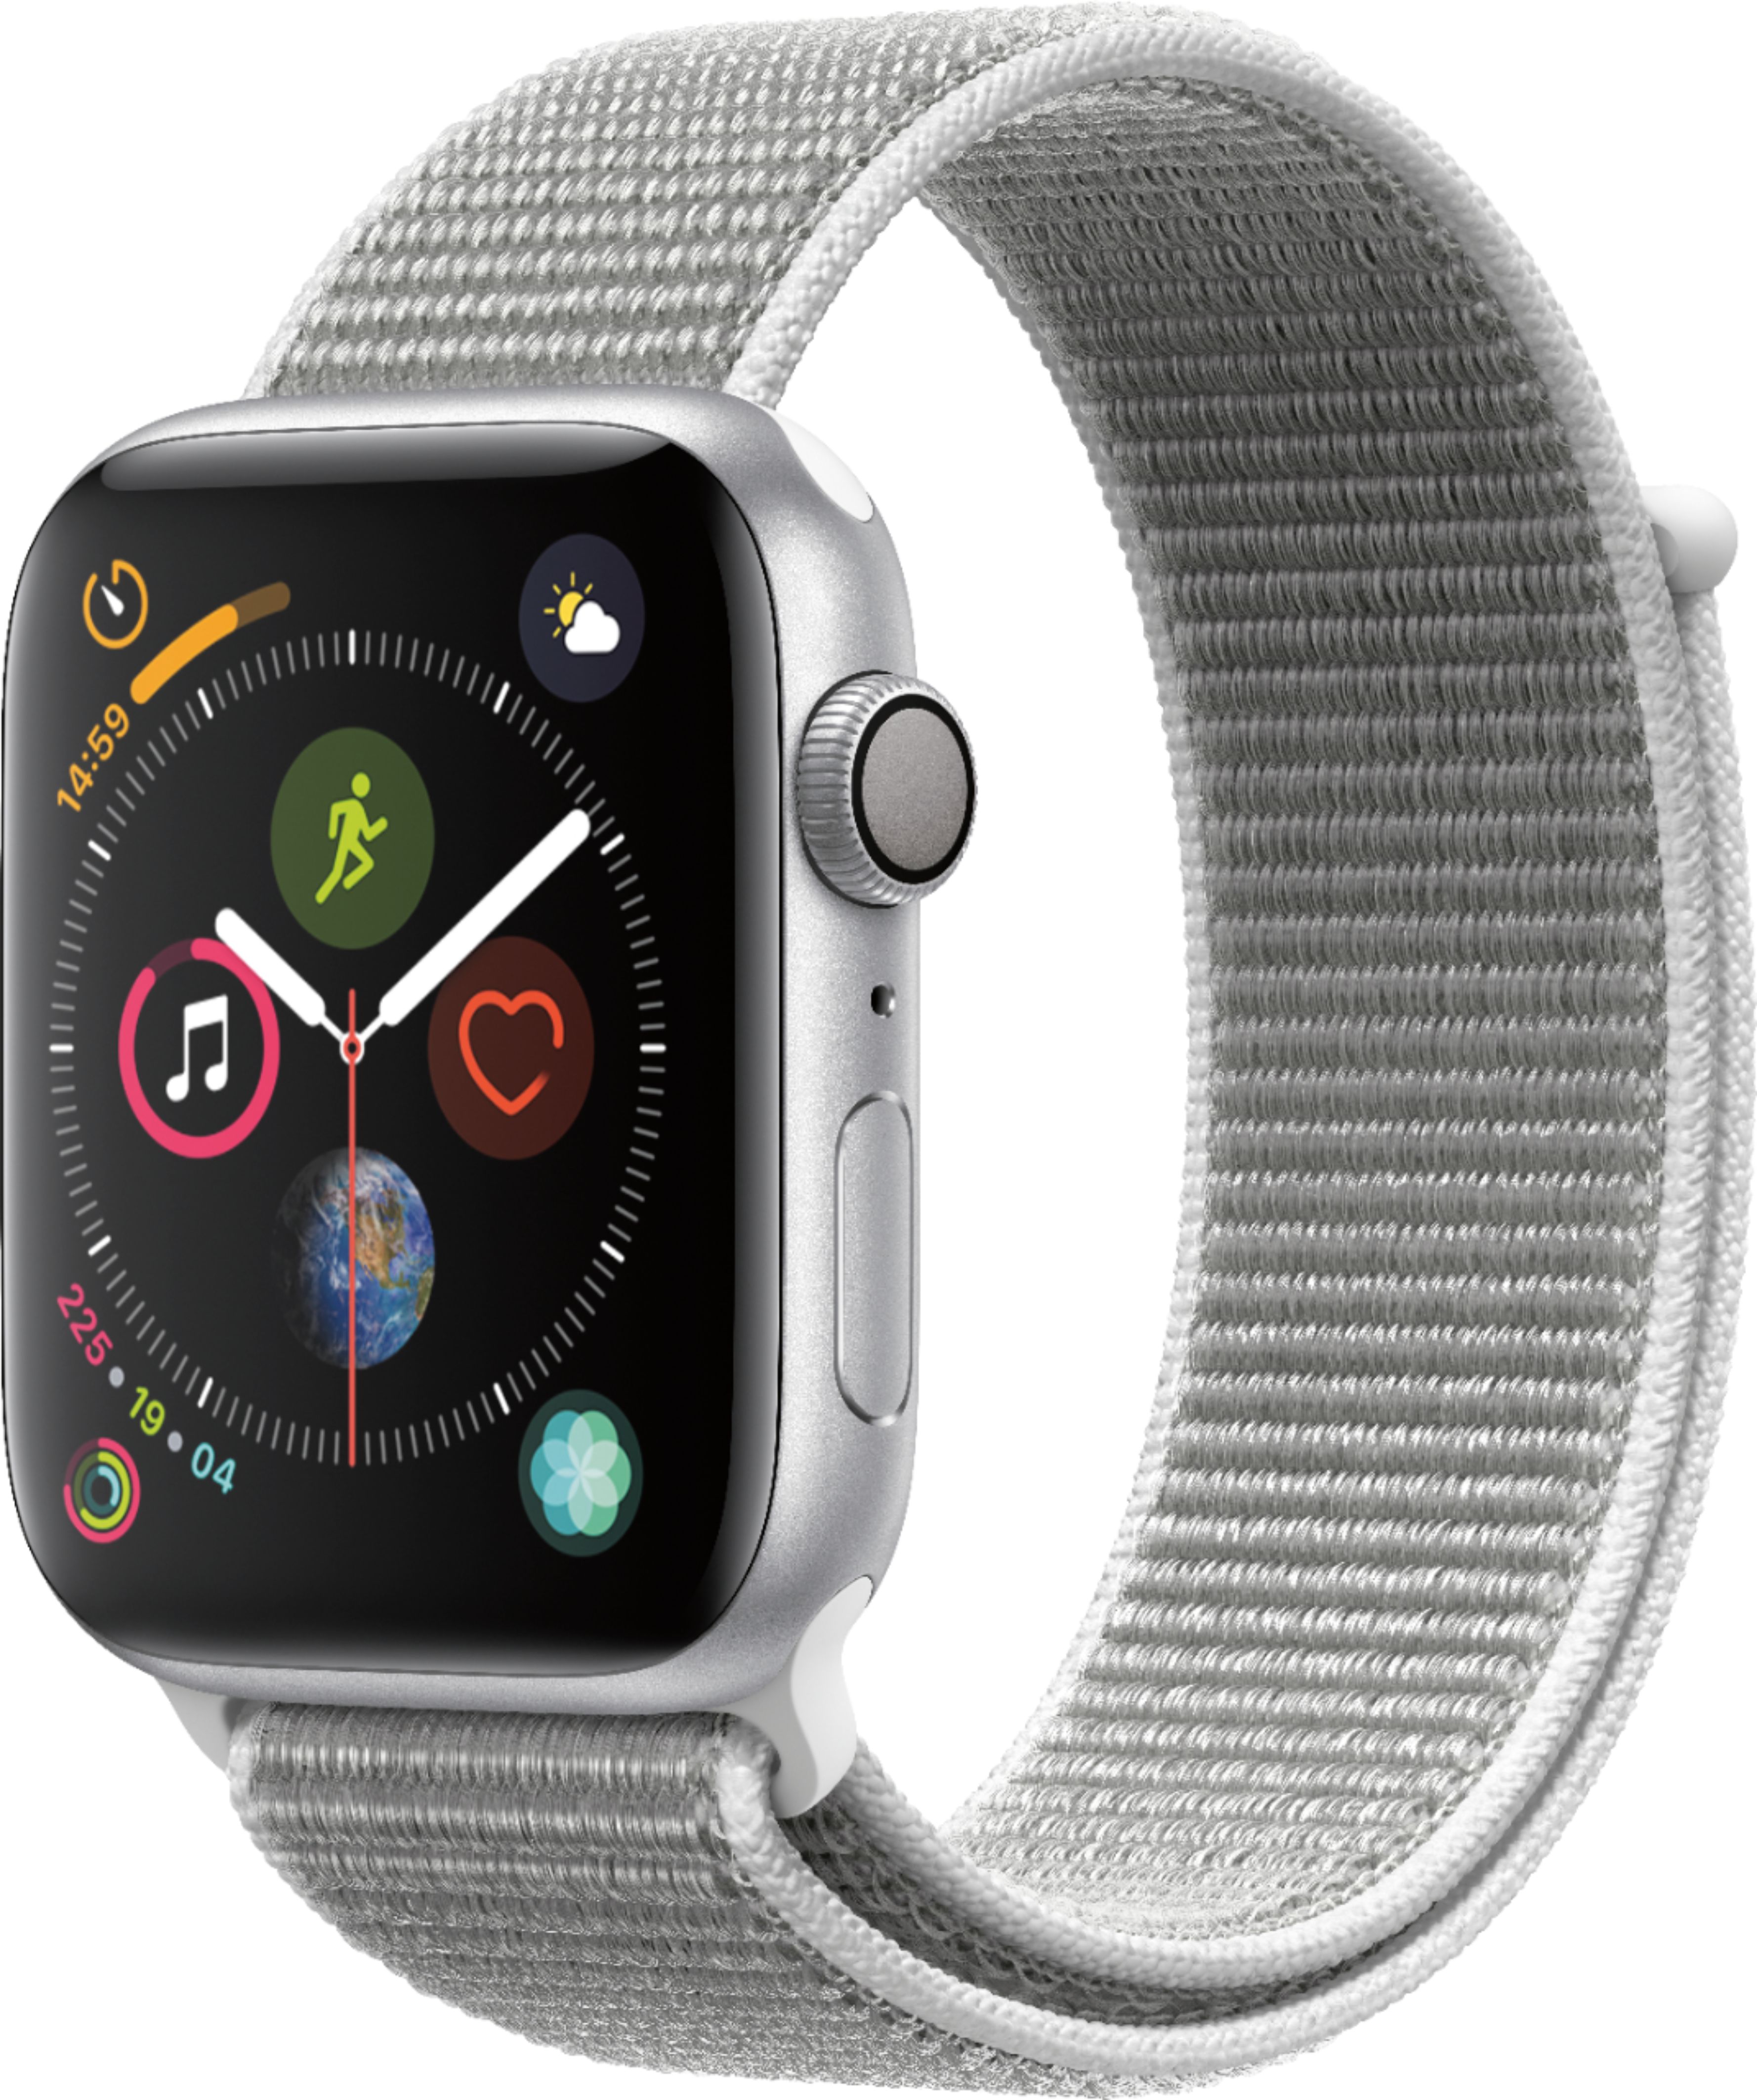 Rent to own Apple Watch Series 4 (GPS) 44mm Silver Aluminum Case with Seashell Sport Loop - Silver Aluminum